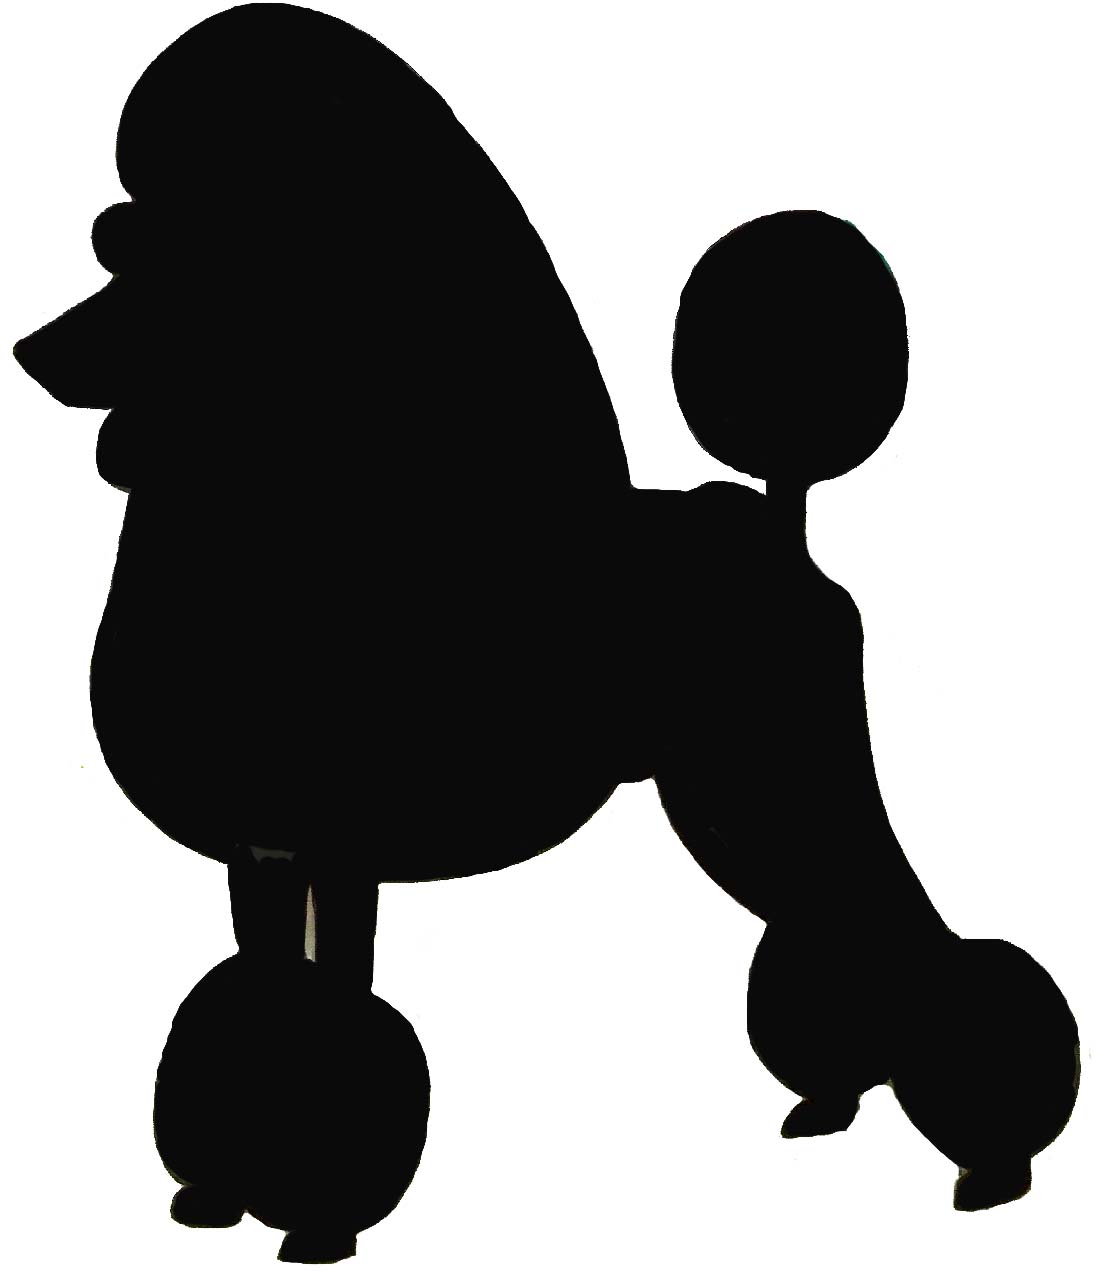 Beautiful clipart poodle. Silhouette at getdrawings com